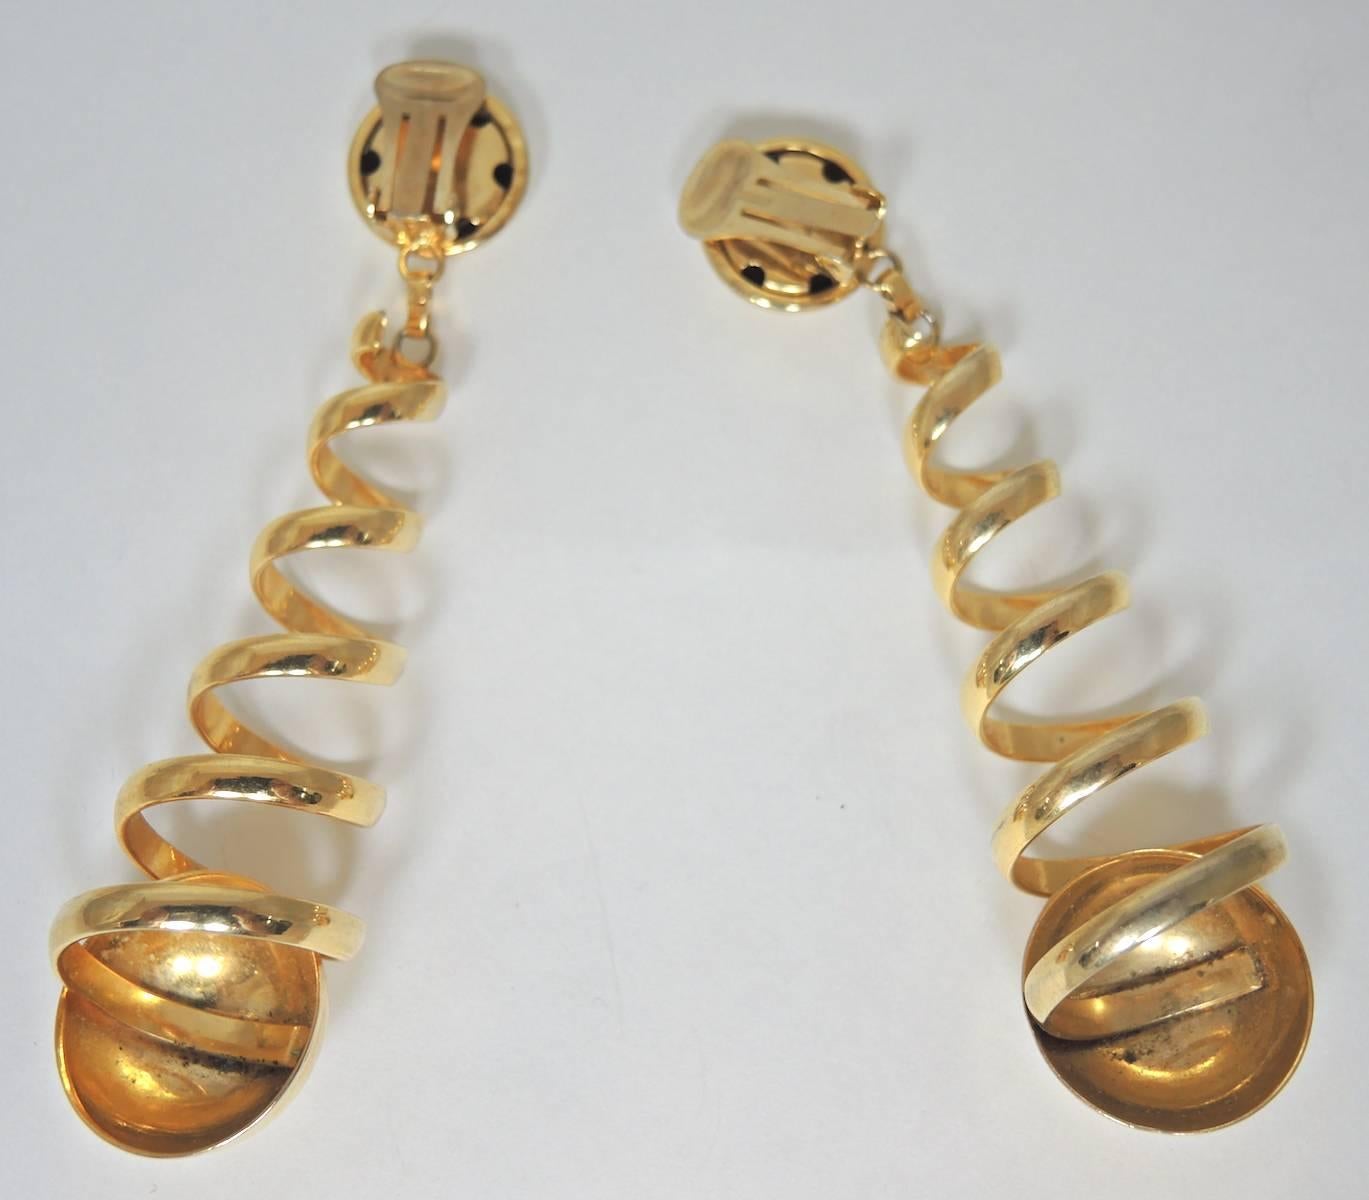 These earrings make a great conversation piece. The top is a button earring that connects to a long coiled dangling design. It ends with another larger button at the bottom. It is in a gold tone setting and measures 4” x 1”.  It is in excellent